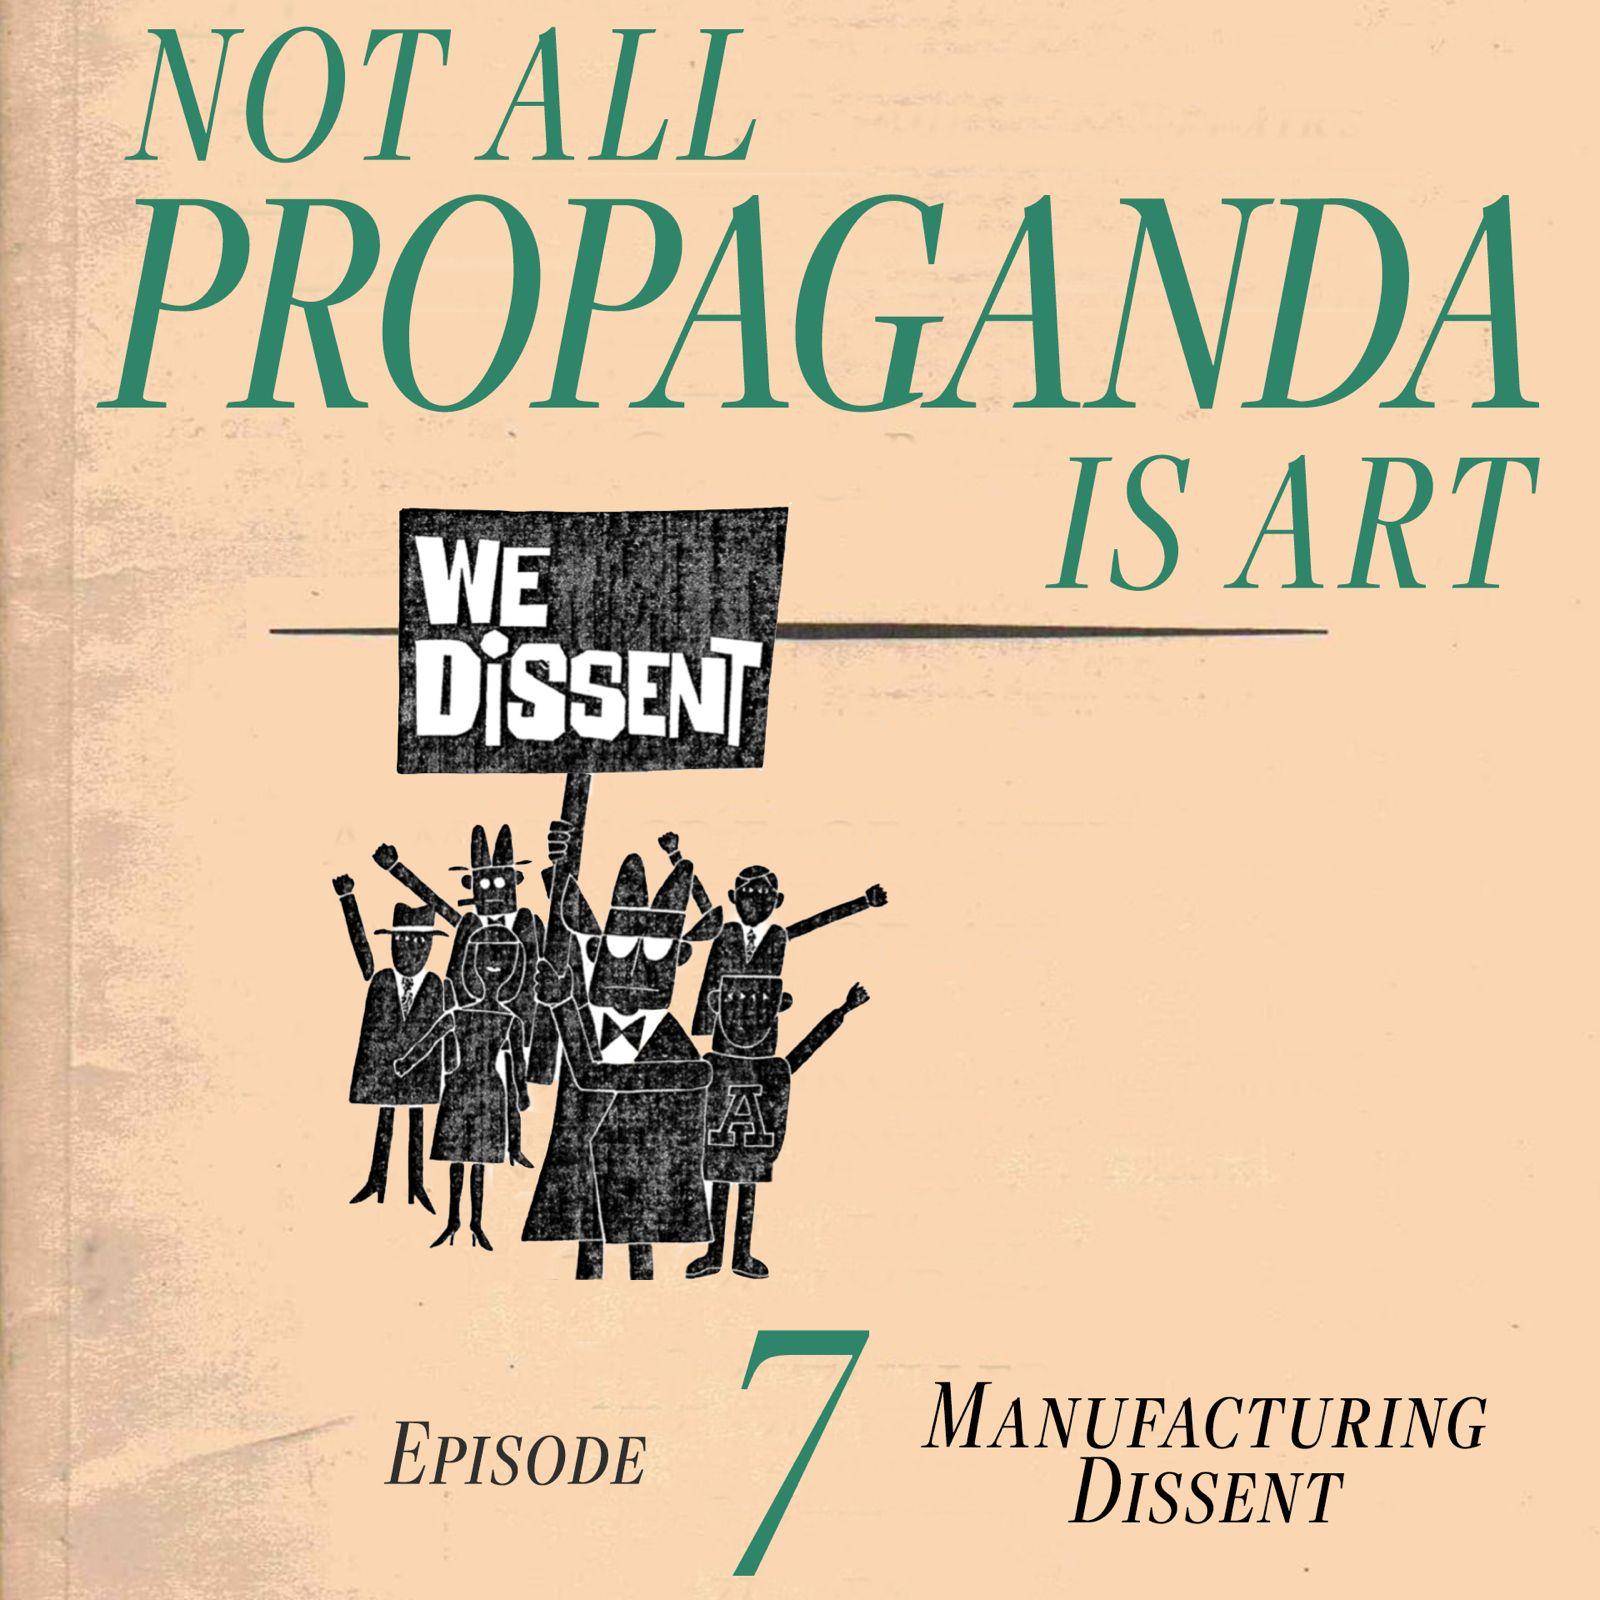 Thumbnail for "Not All Propaganda is Art 7: Manufacturing Dissent".